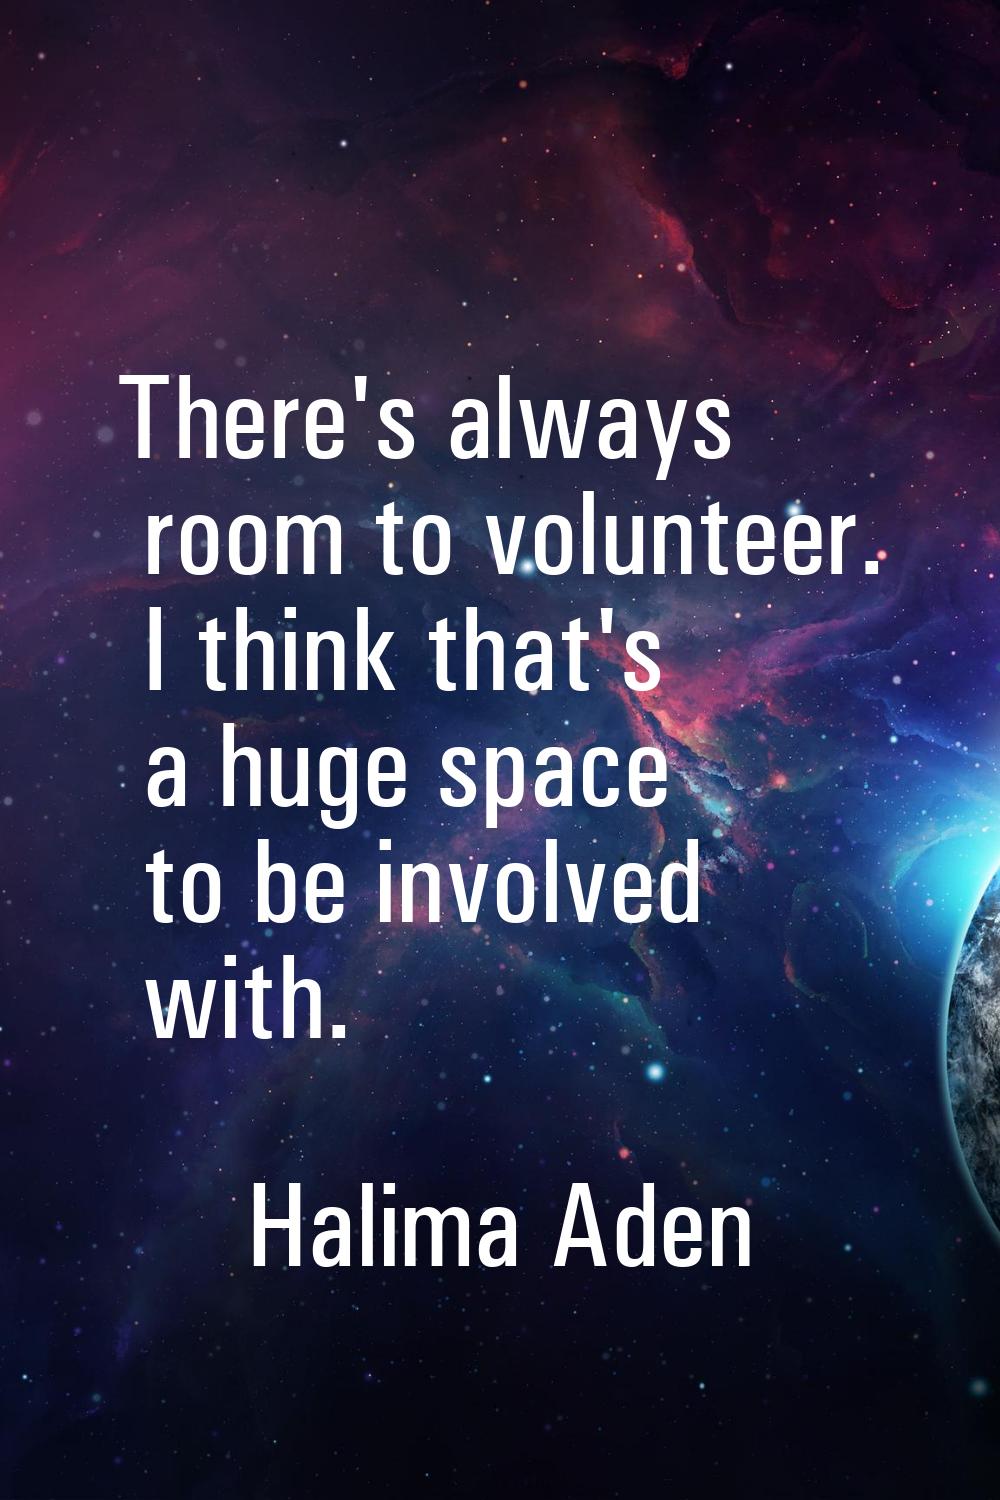 There's always room to volunteer. I think that's a huge space to be involved with.